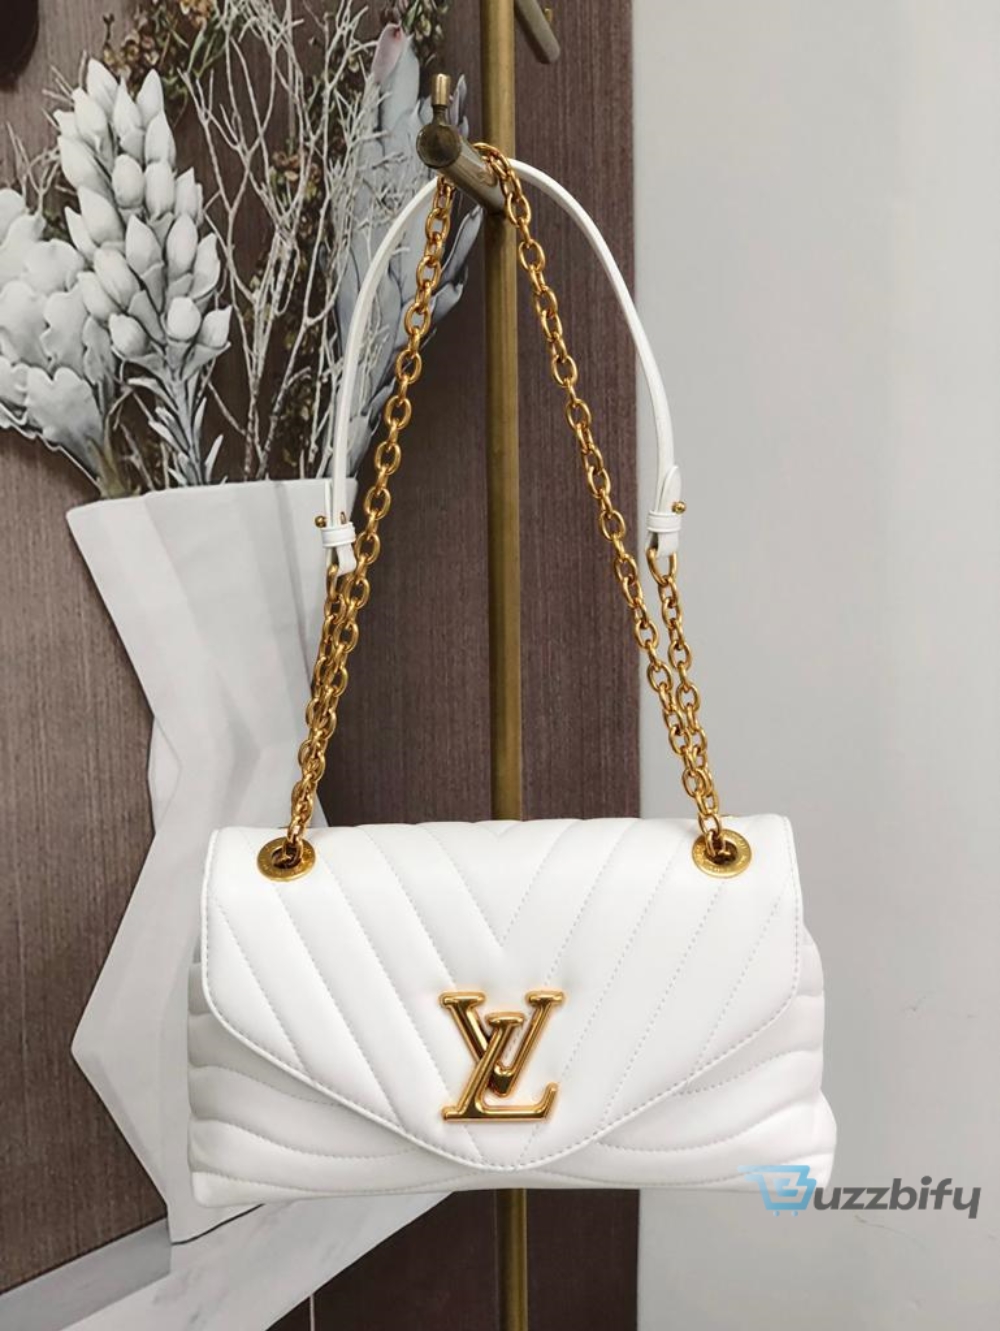 louis vuitton new wave chain bag white for women womens handbags shoulder and crossbody bags 94in24cm lv m58549 2799 buzzbify 1 29